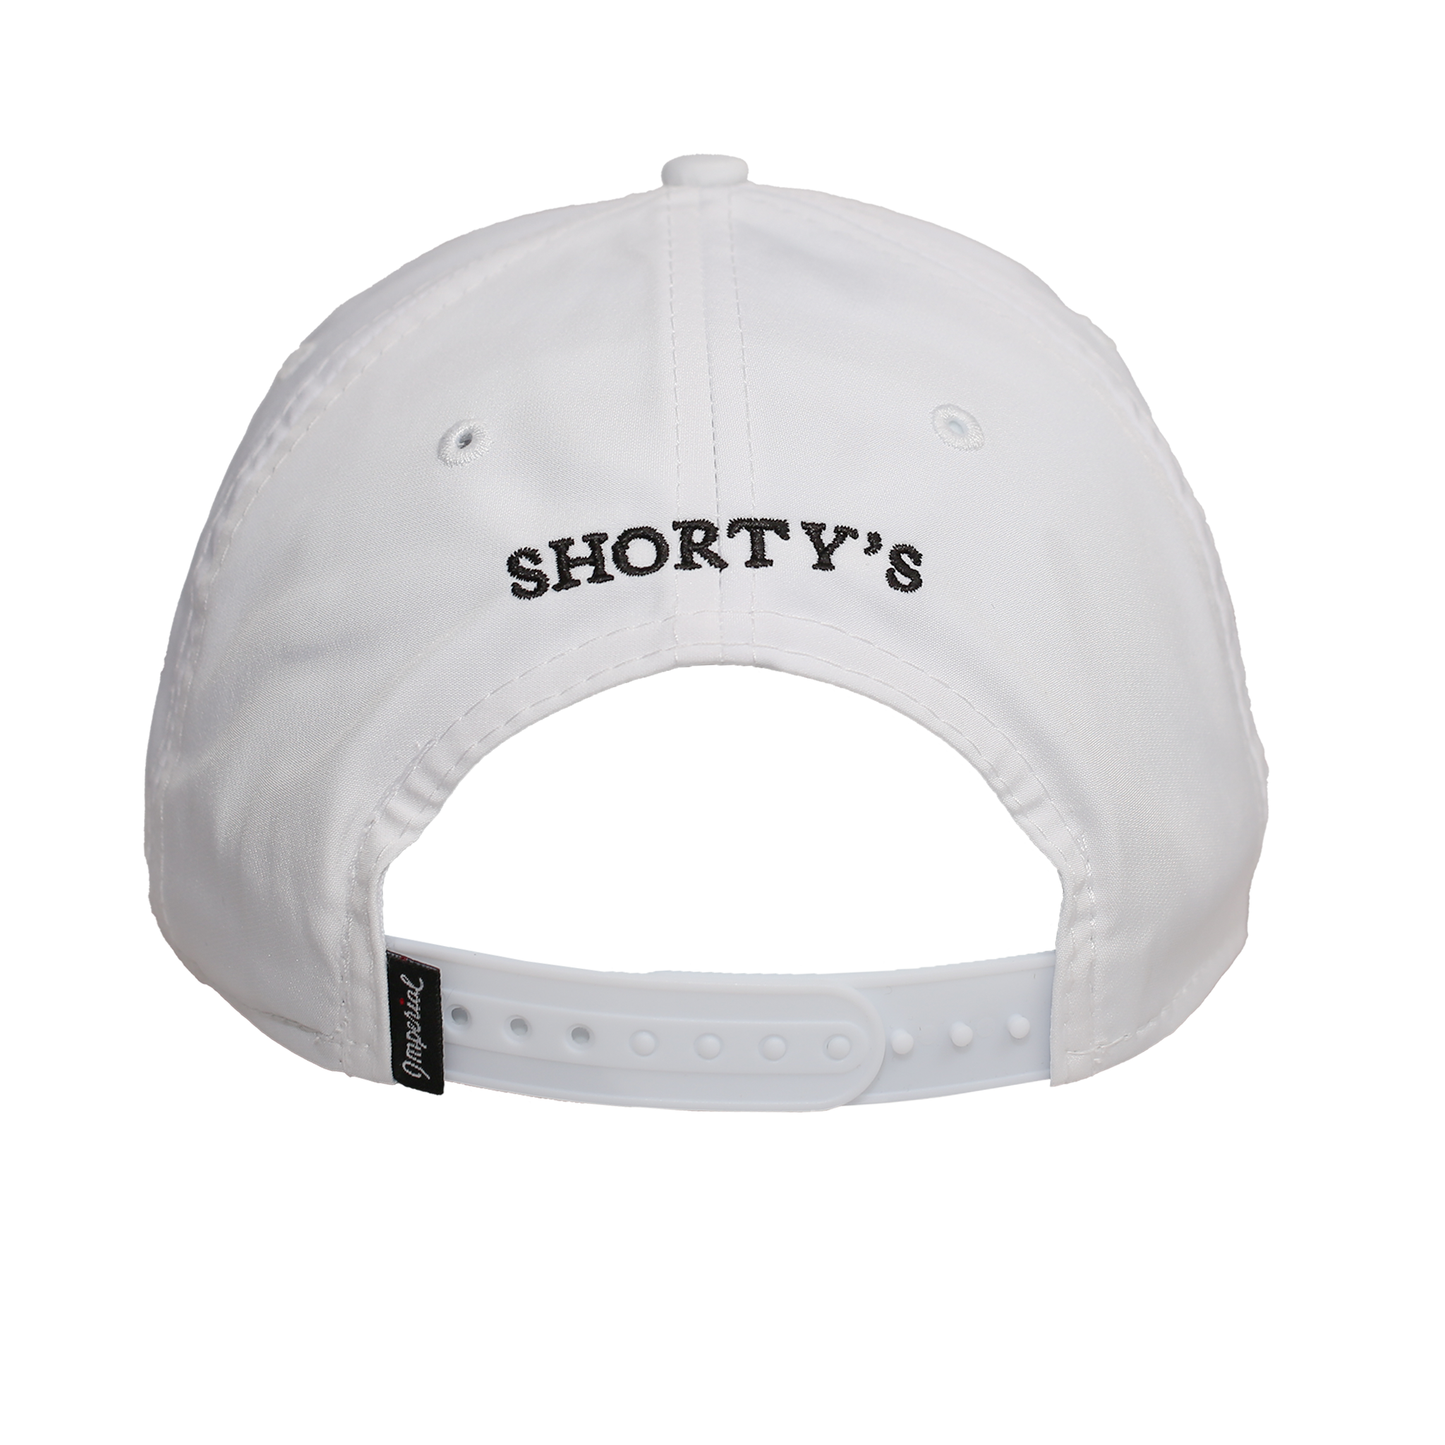 The Wrightson 5054 Hat - Shorty's